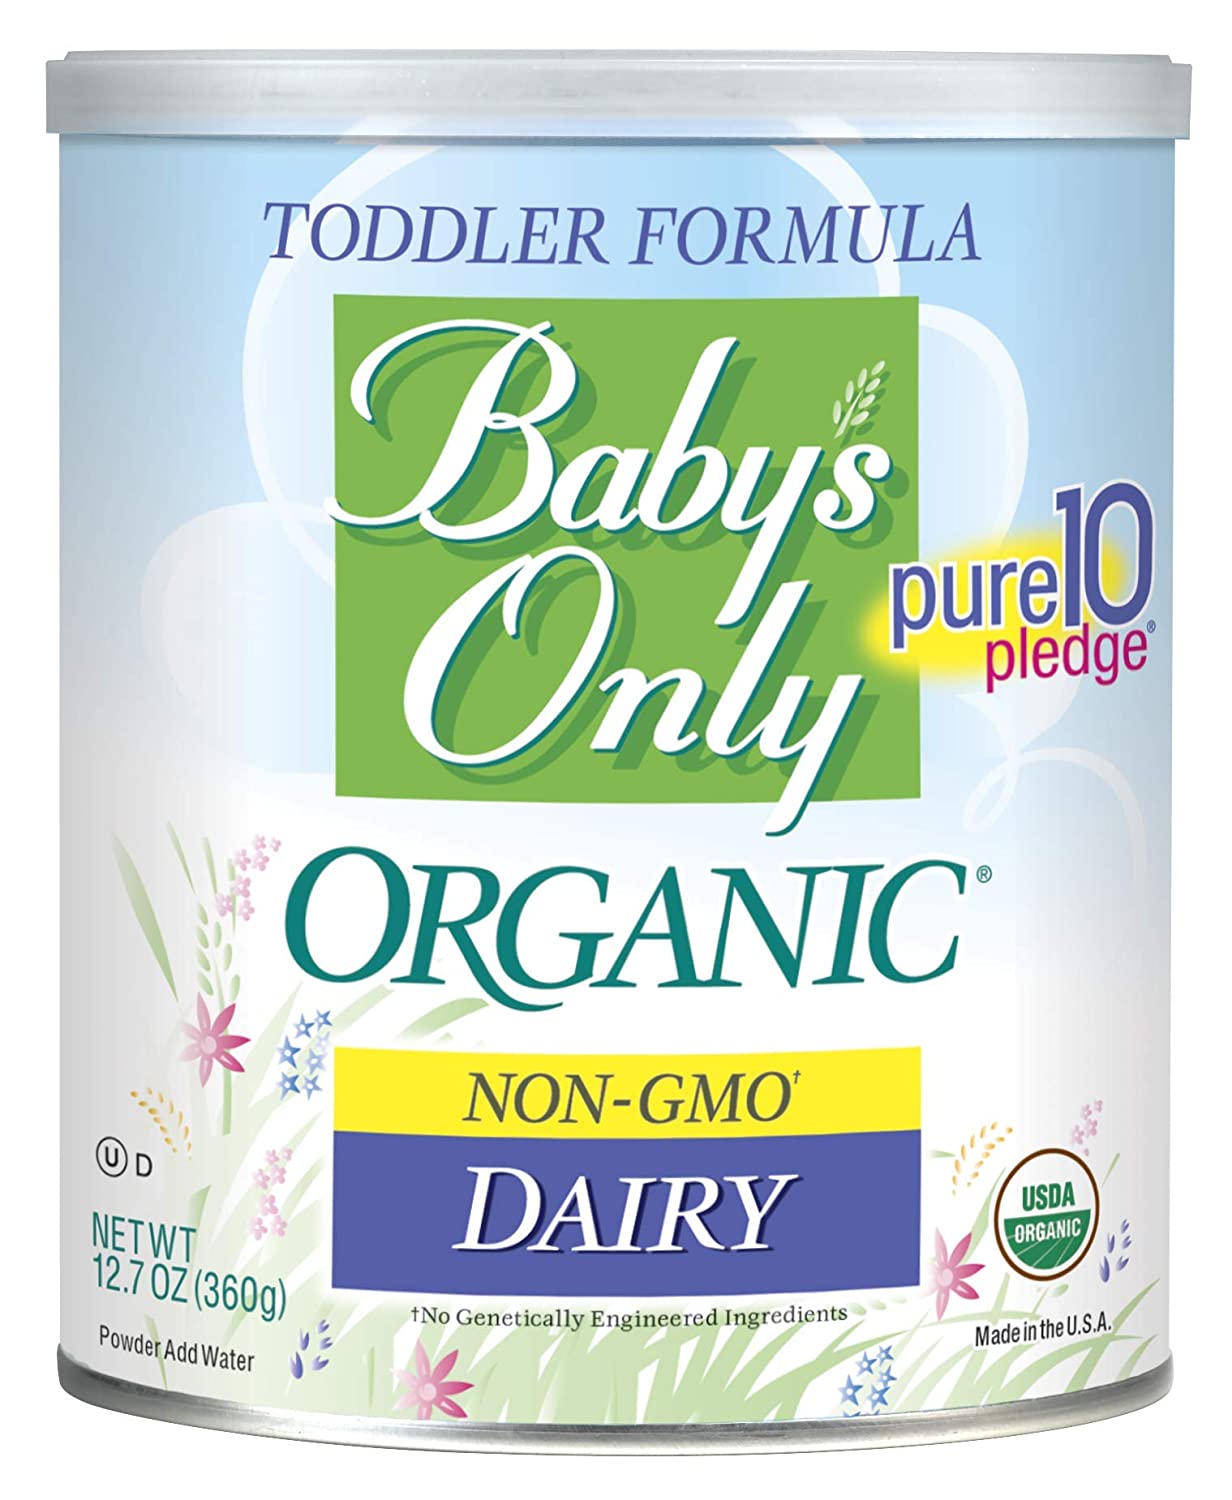 Baby's Only Dairy Toddler Formula - Non GMO, USDA Organic, Clean Label Project Verified